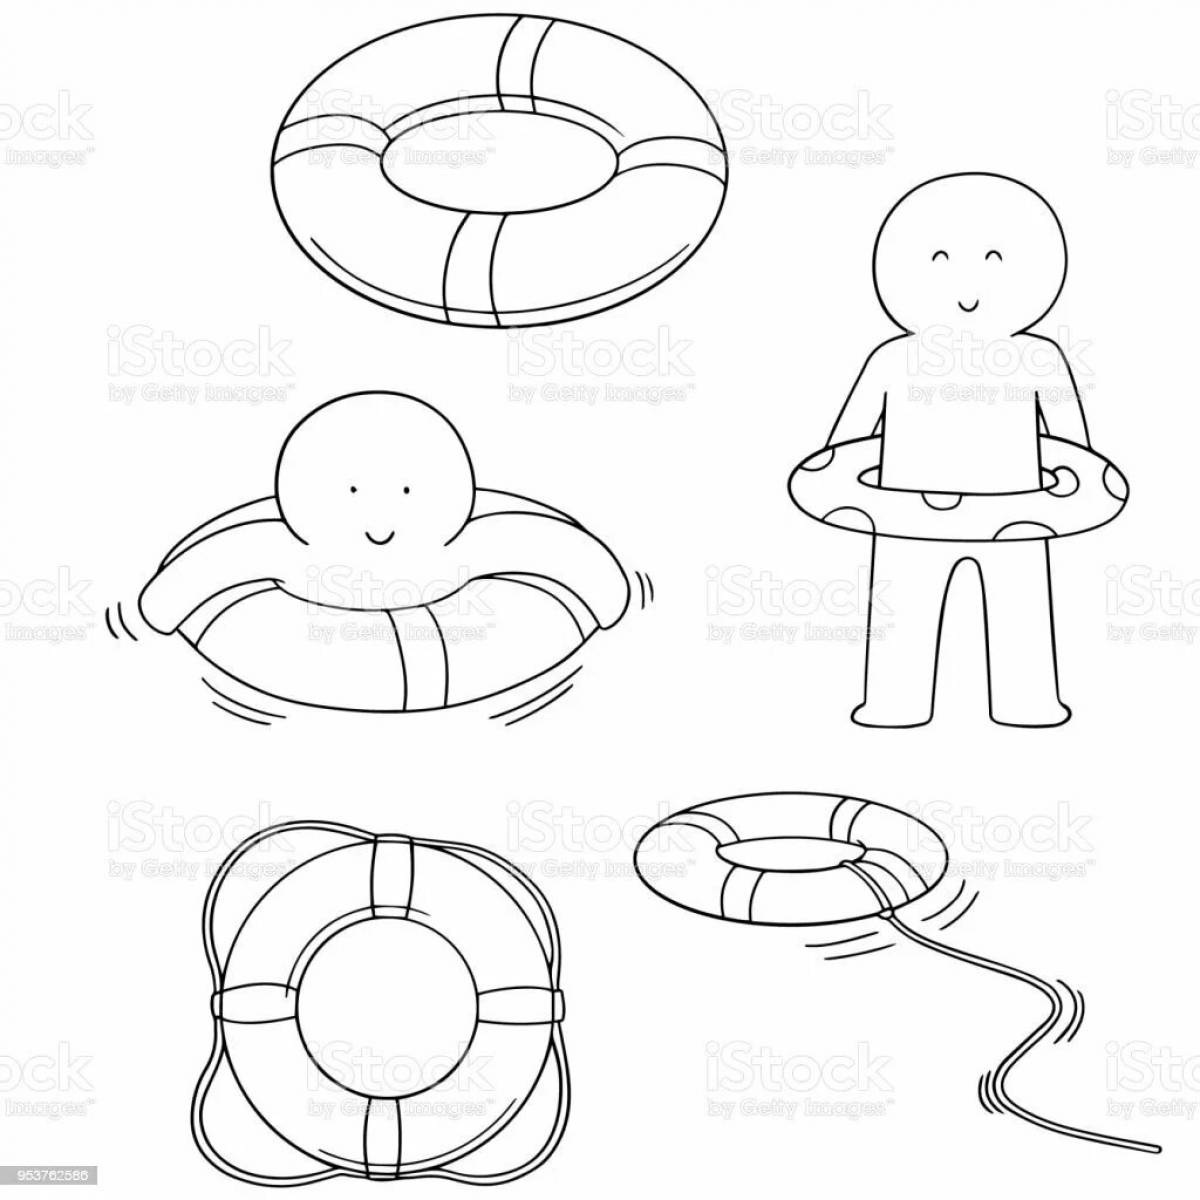 Coloring page baby life buoy